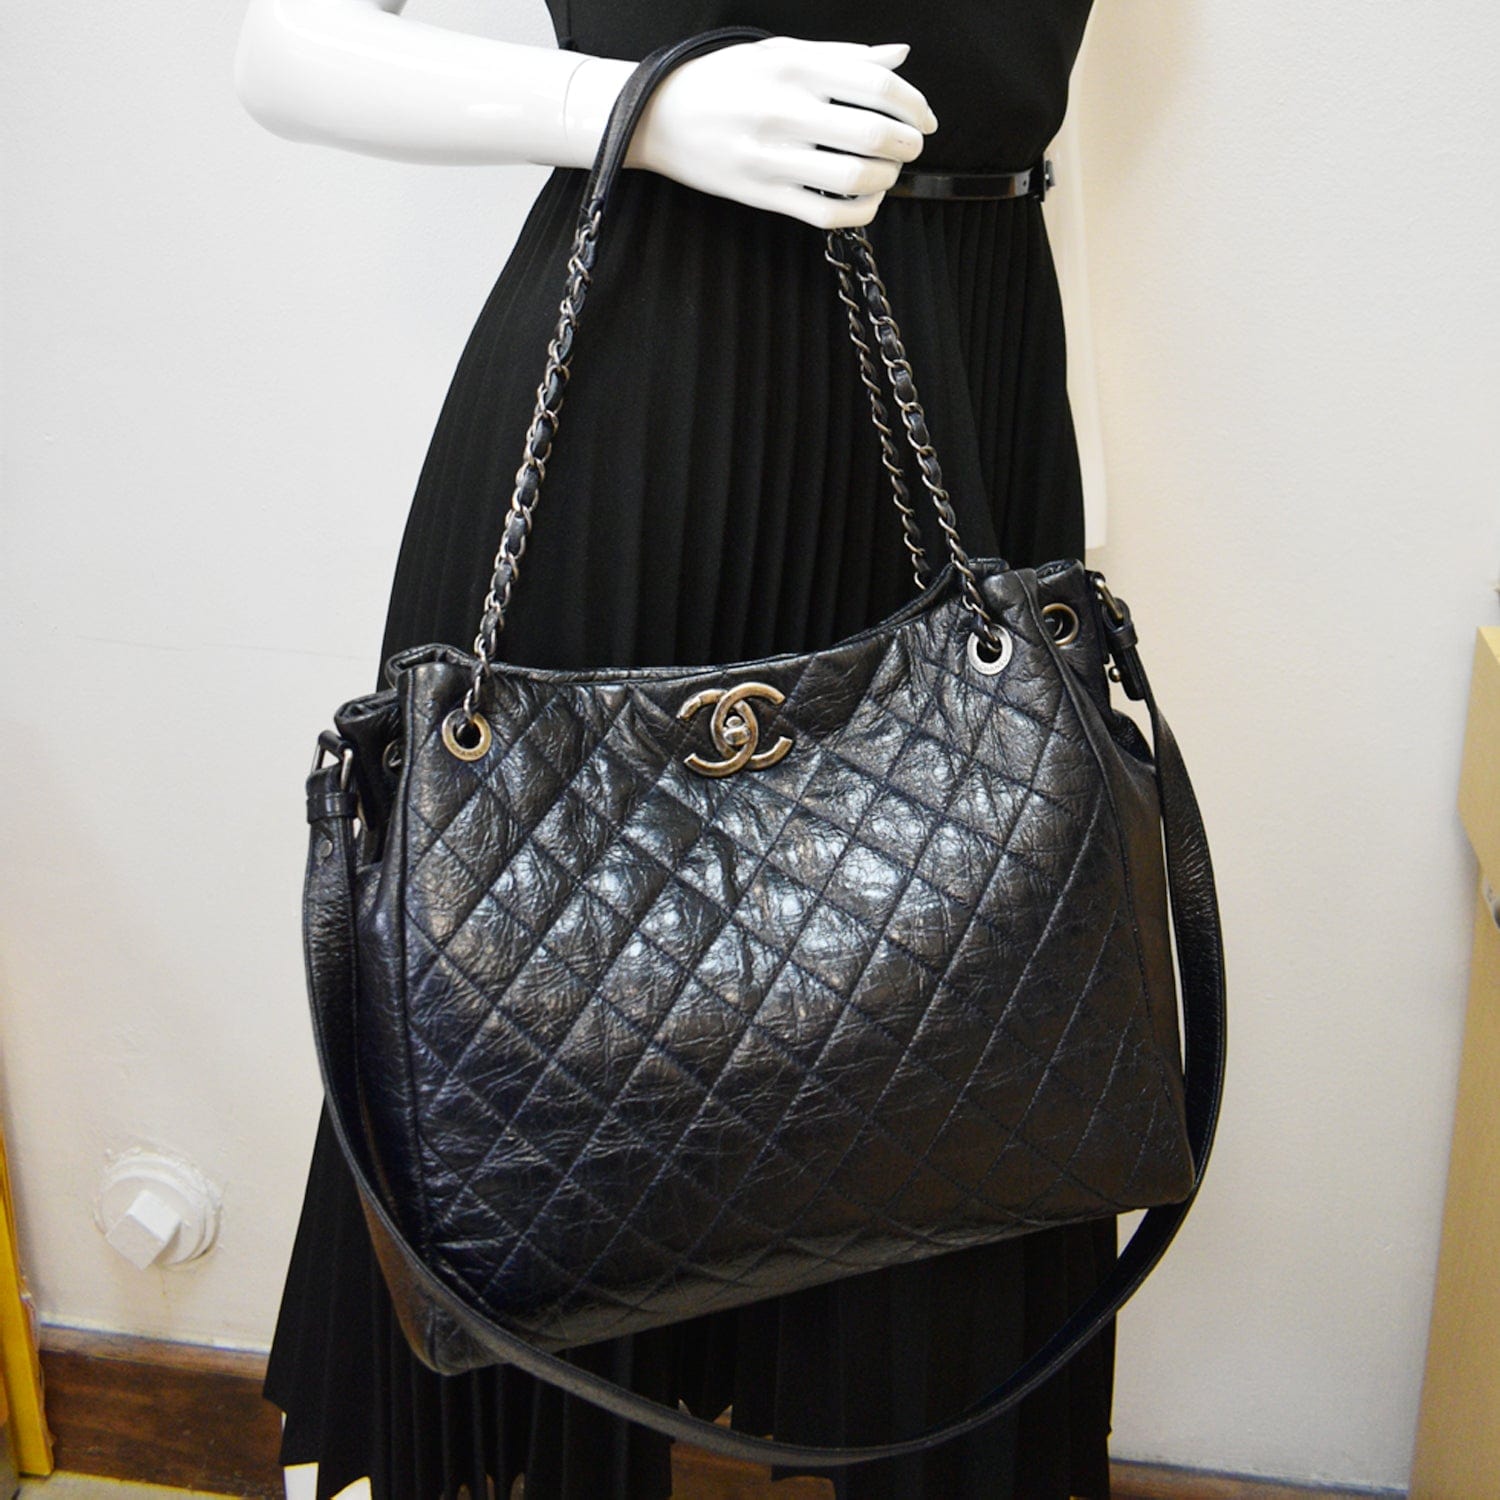 Chanel Black Quilted Aged Calfskin Leather Gabrielle Hobo Bag